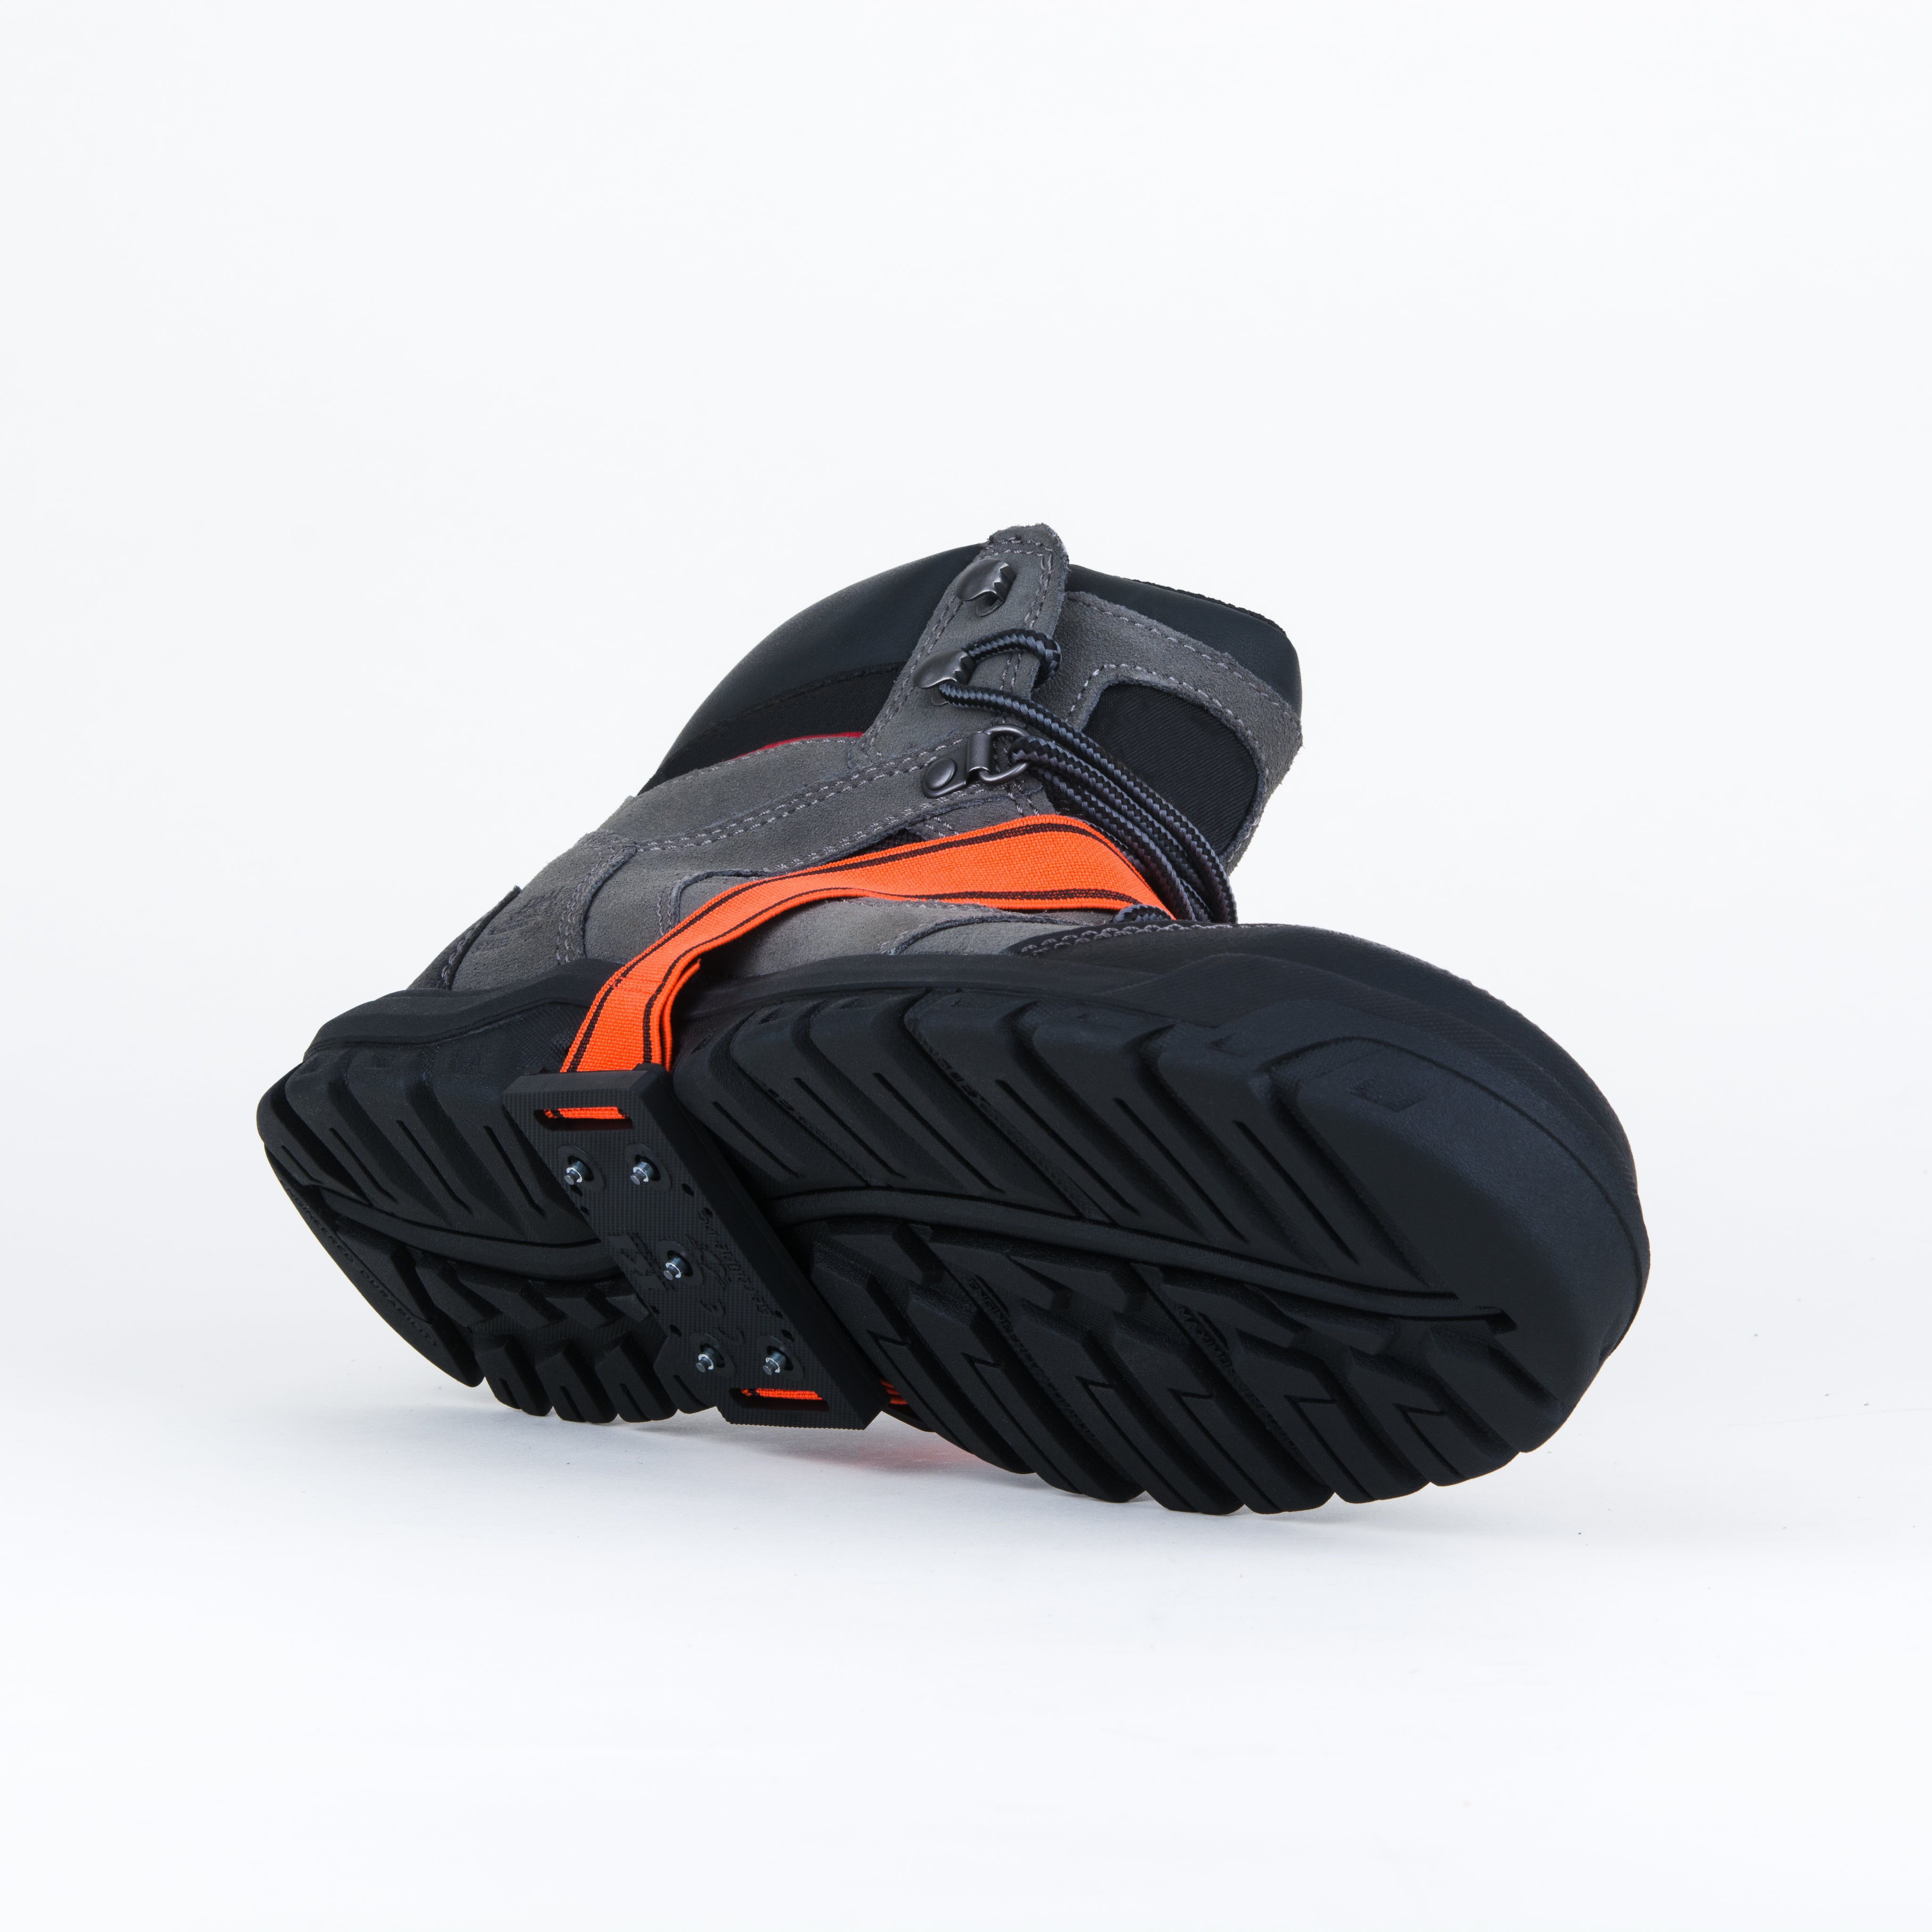 K1 Series Mid-Sole Low Profile Hi-Vis Ice Cleat (For Work Boots & Safety Shoes) Work Boots - Cleanflow